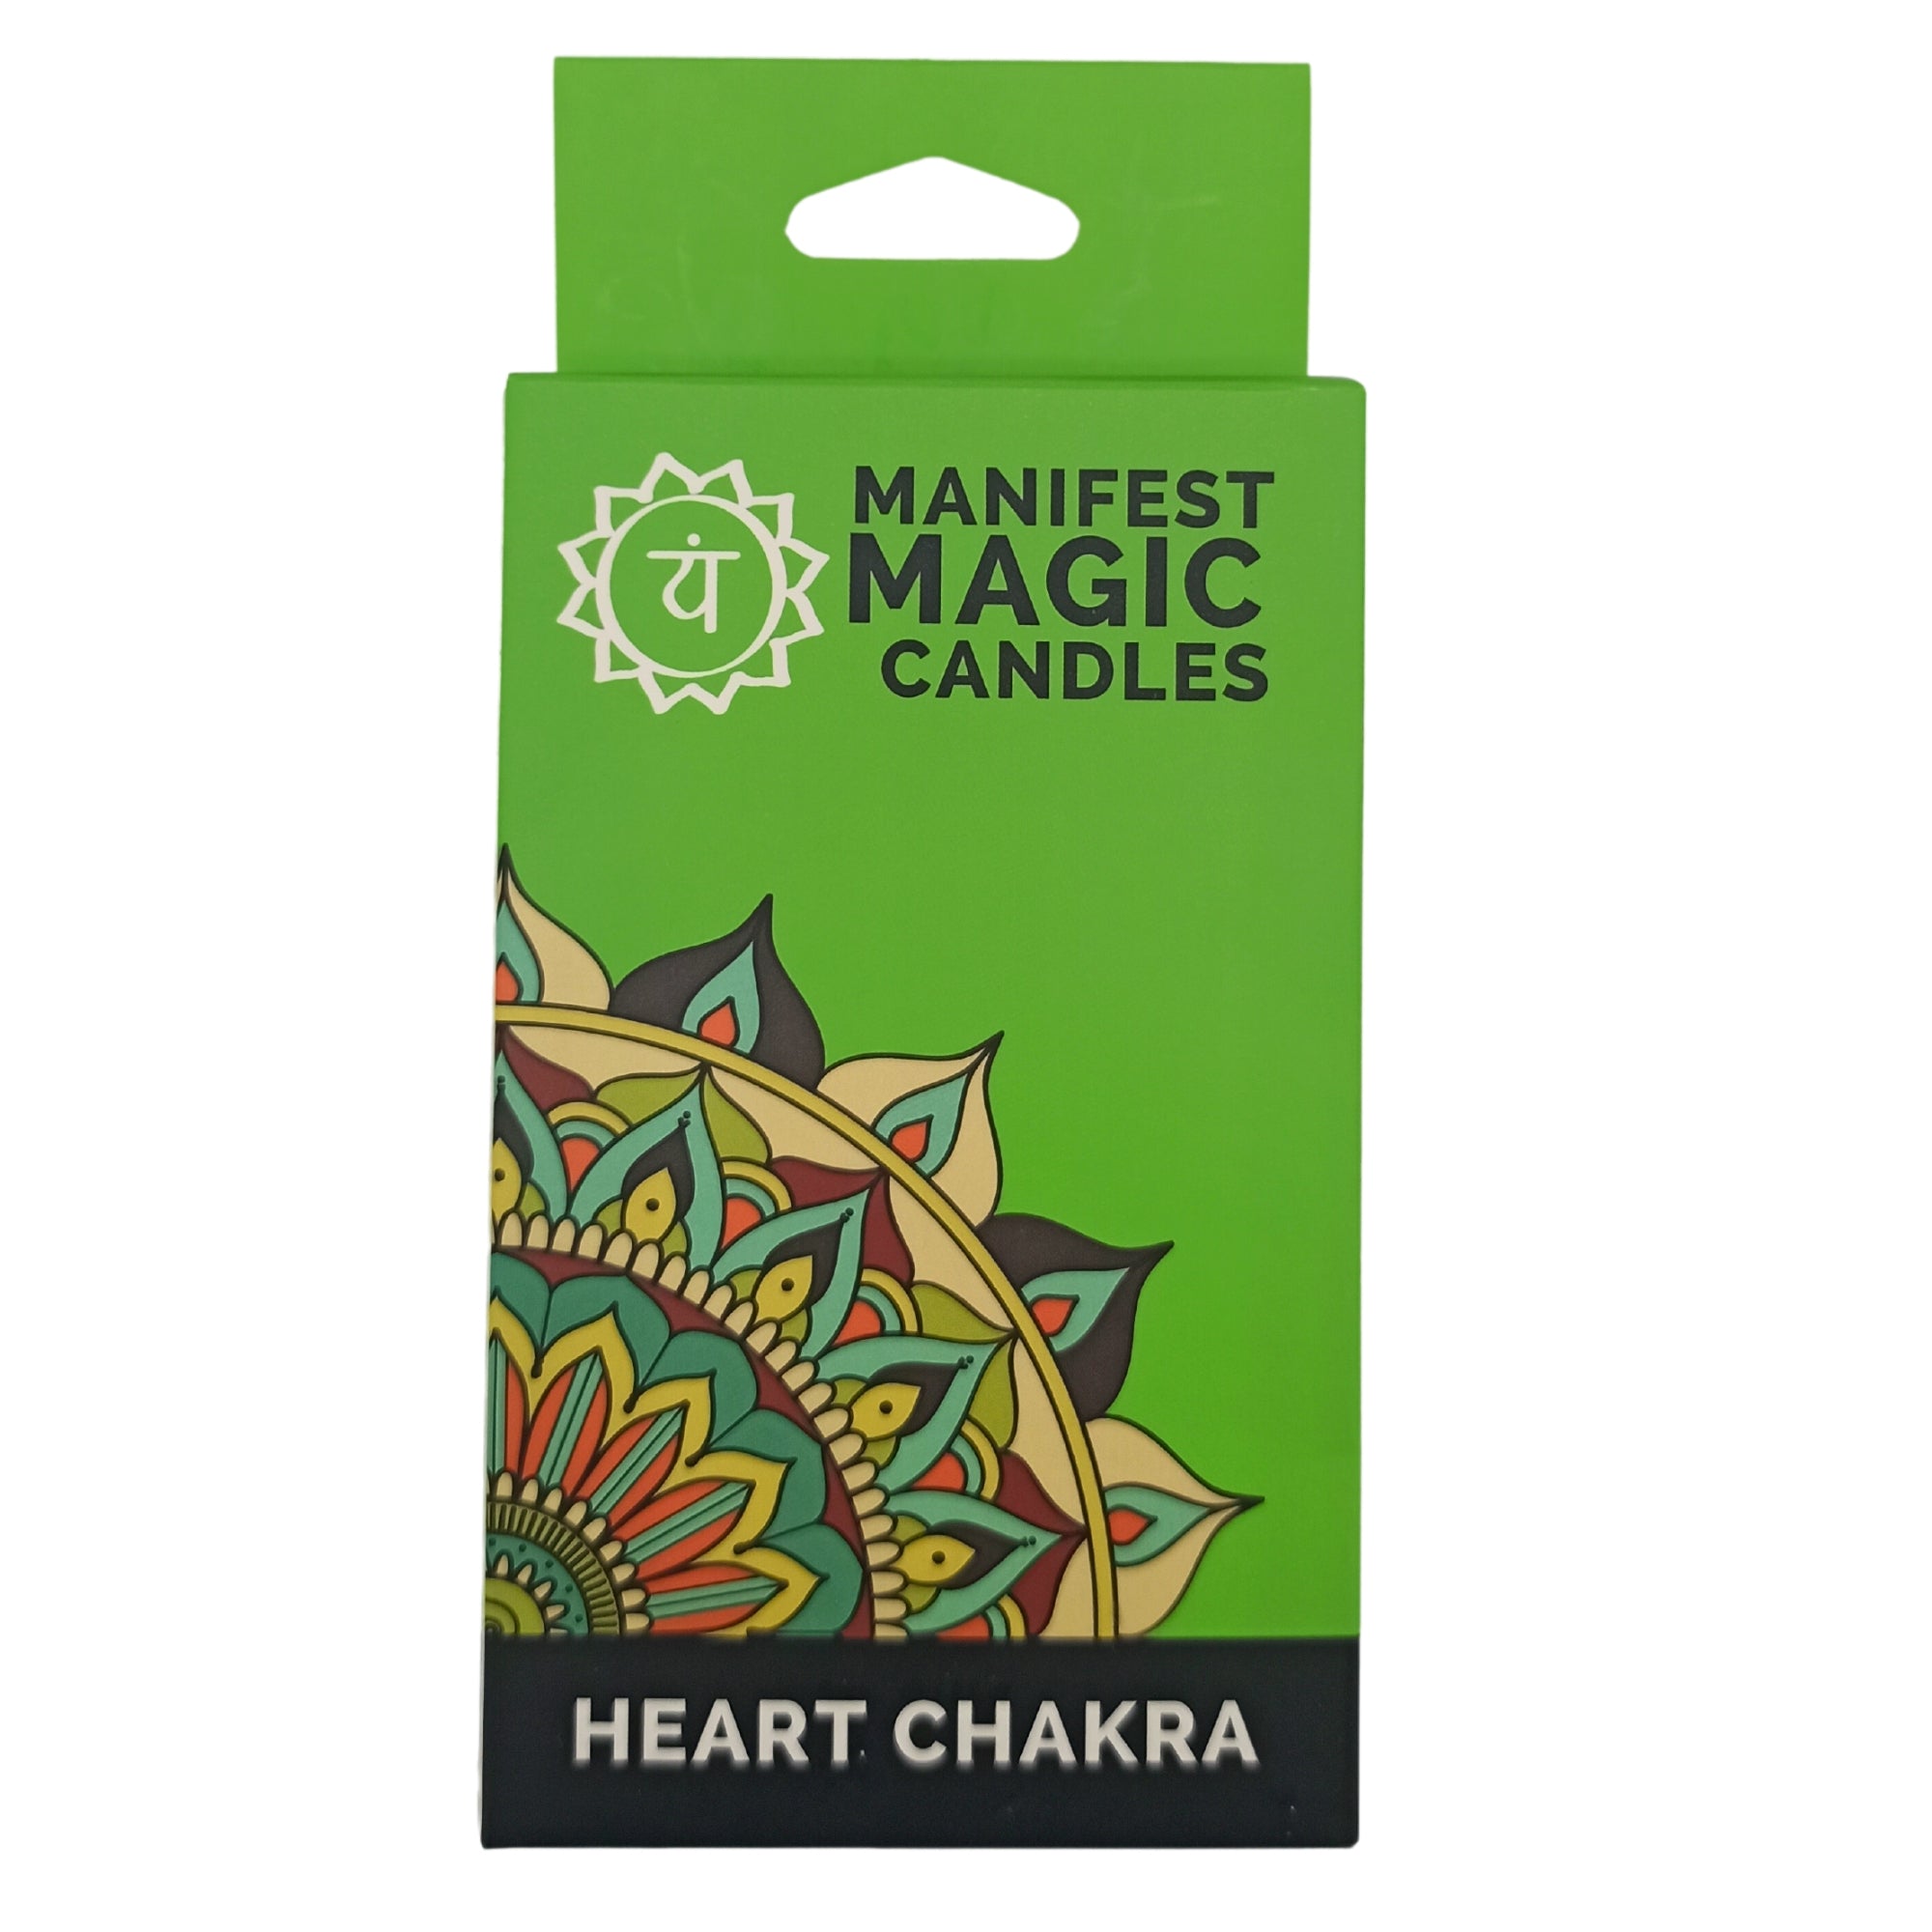 View Manifest Magic Candles pack of 12 Green Heart Chakra information